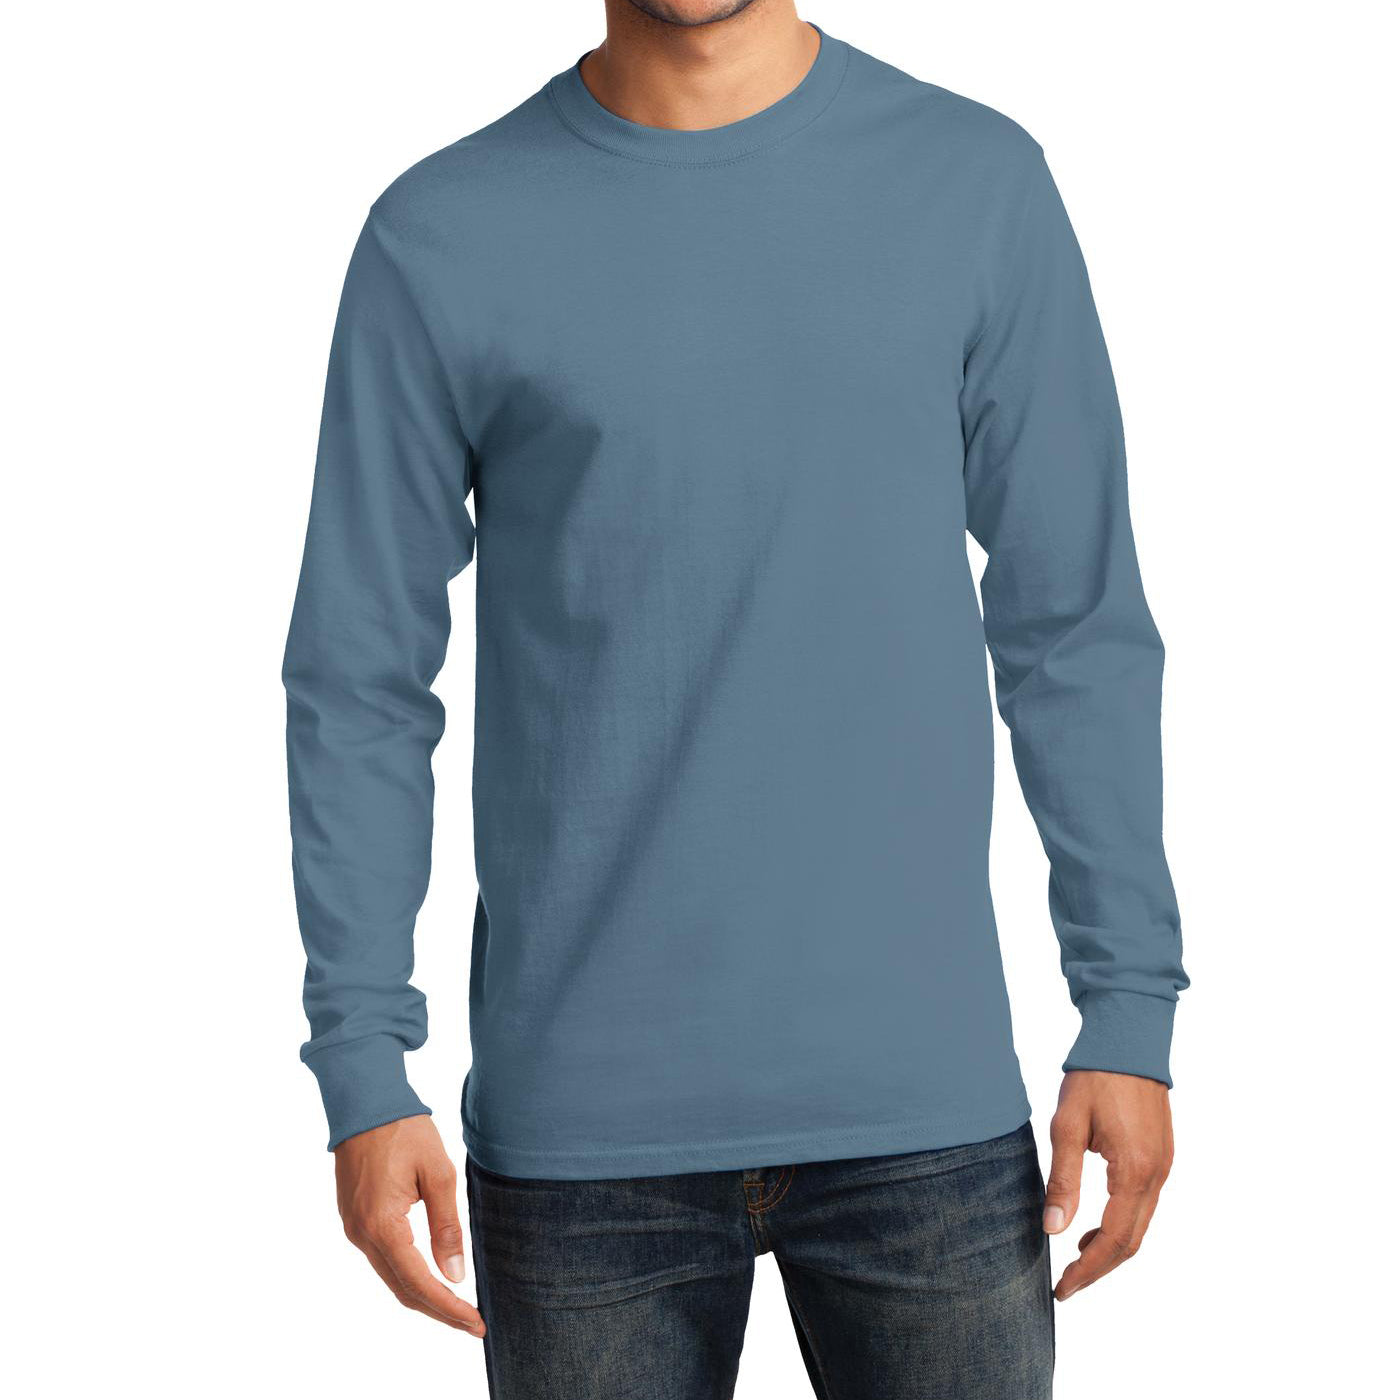 Men's Long Sleeve Essential Tee - Stonewashed Blue - Front